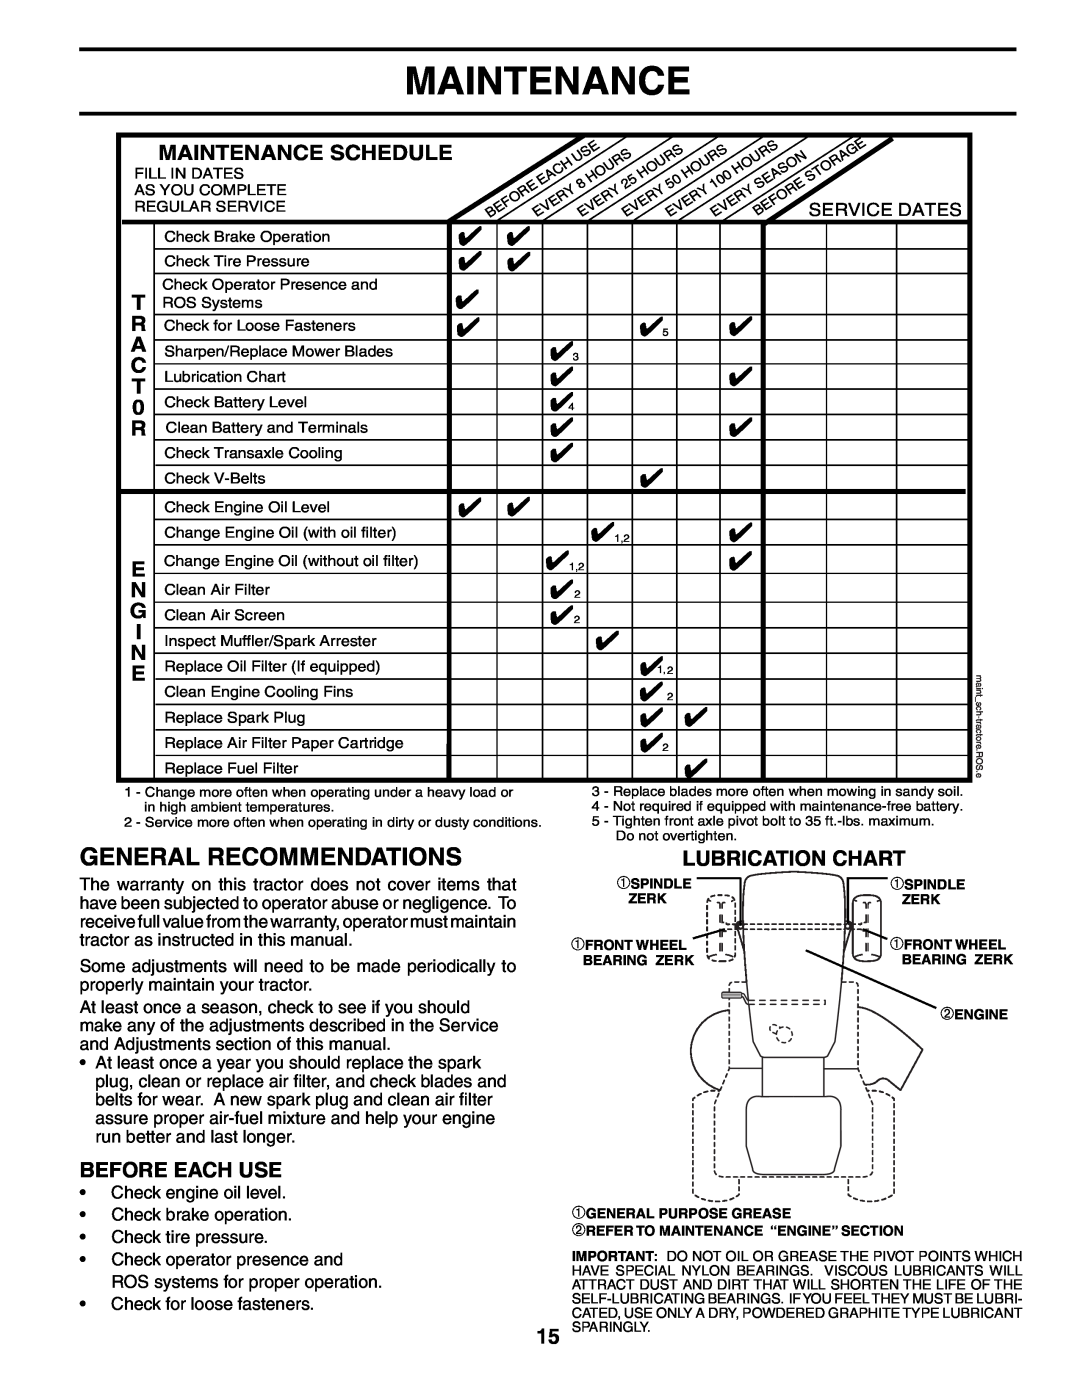 Poulan XT24H42YT manual General Recommendations, Lubrication Chart, Before Each Use, Maintenance Schedule 